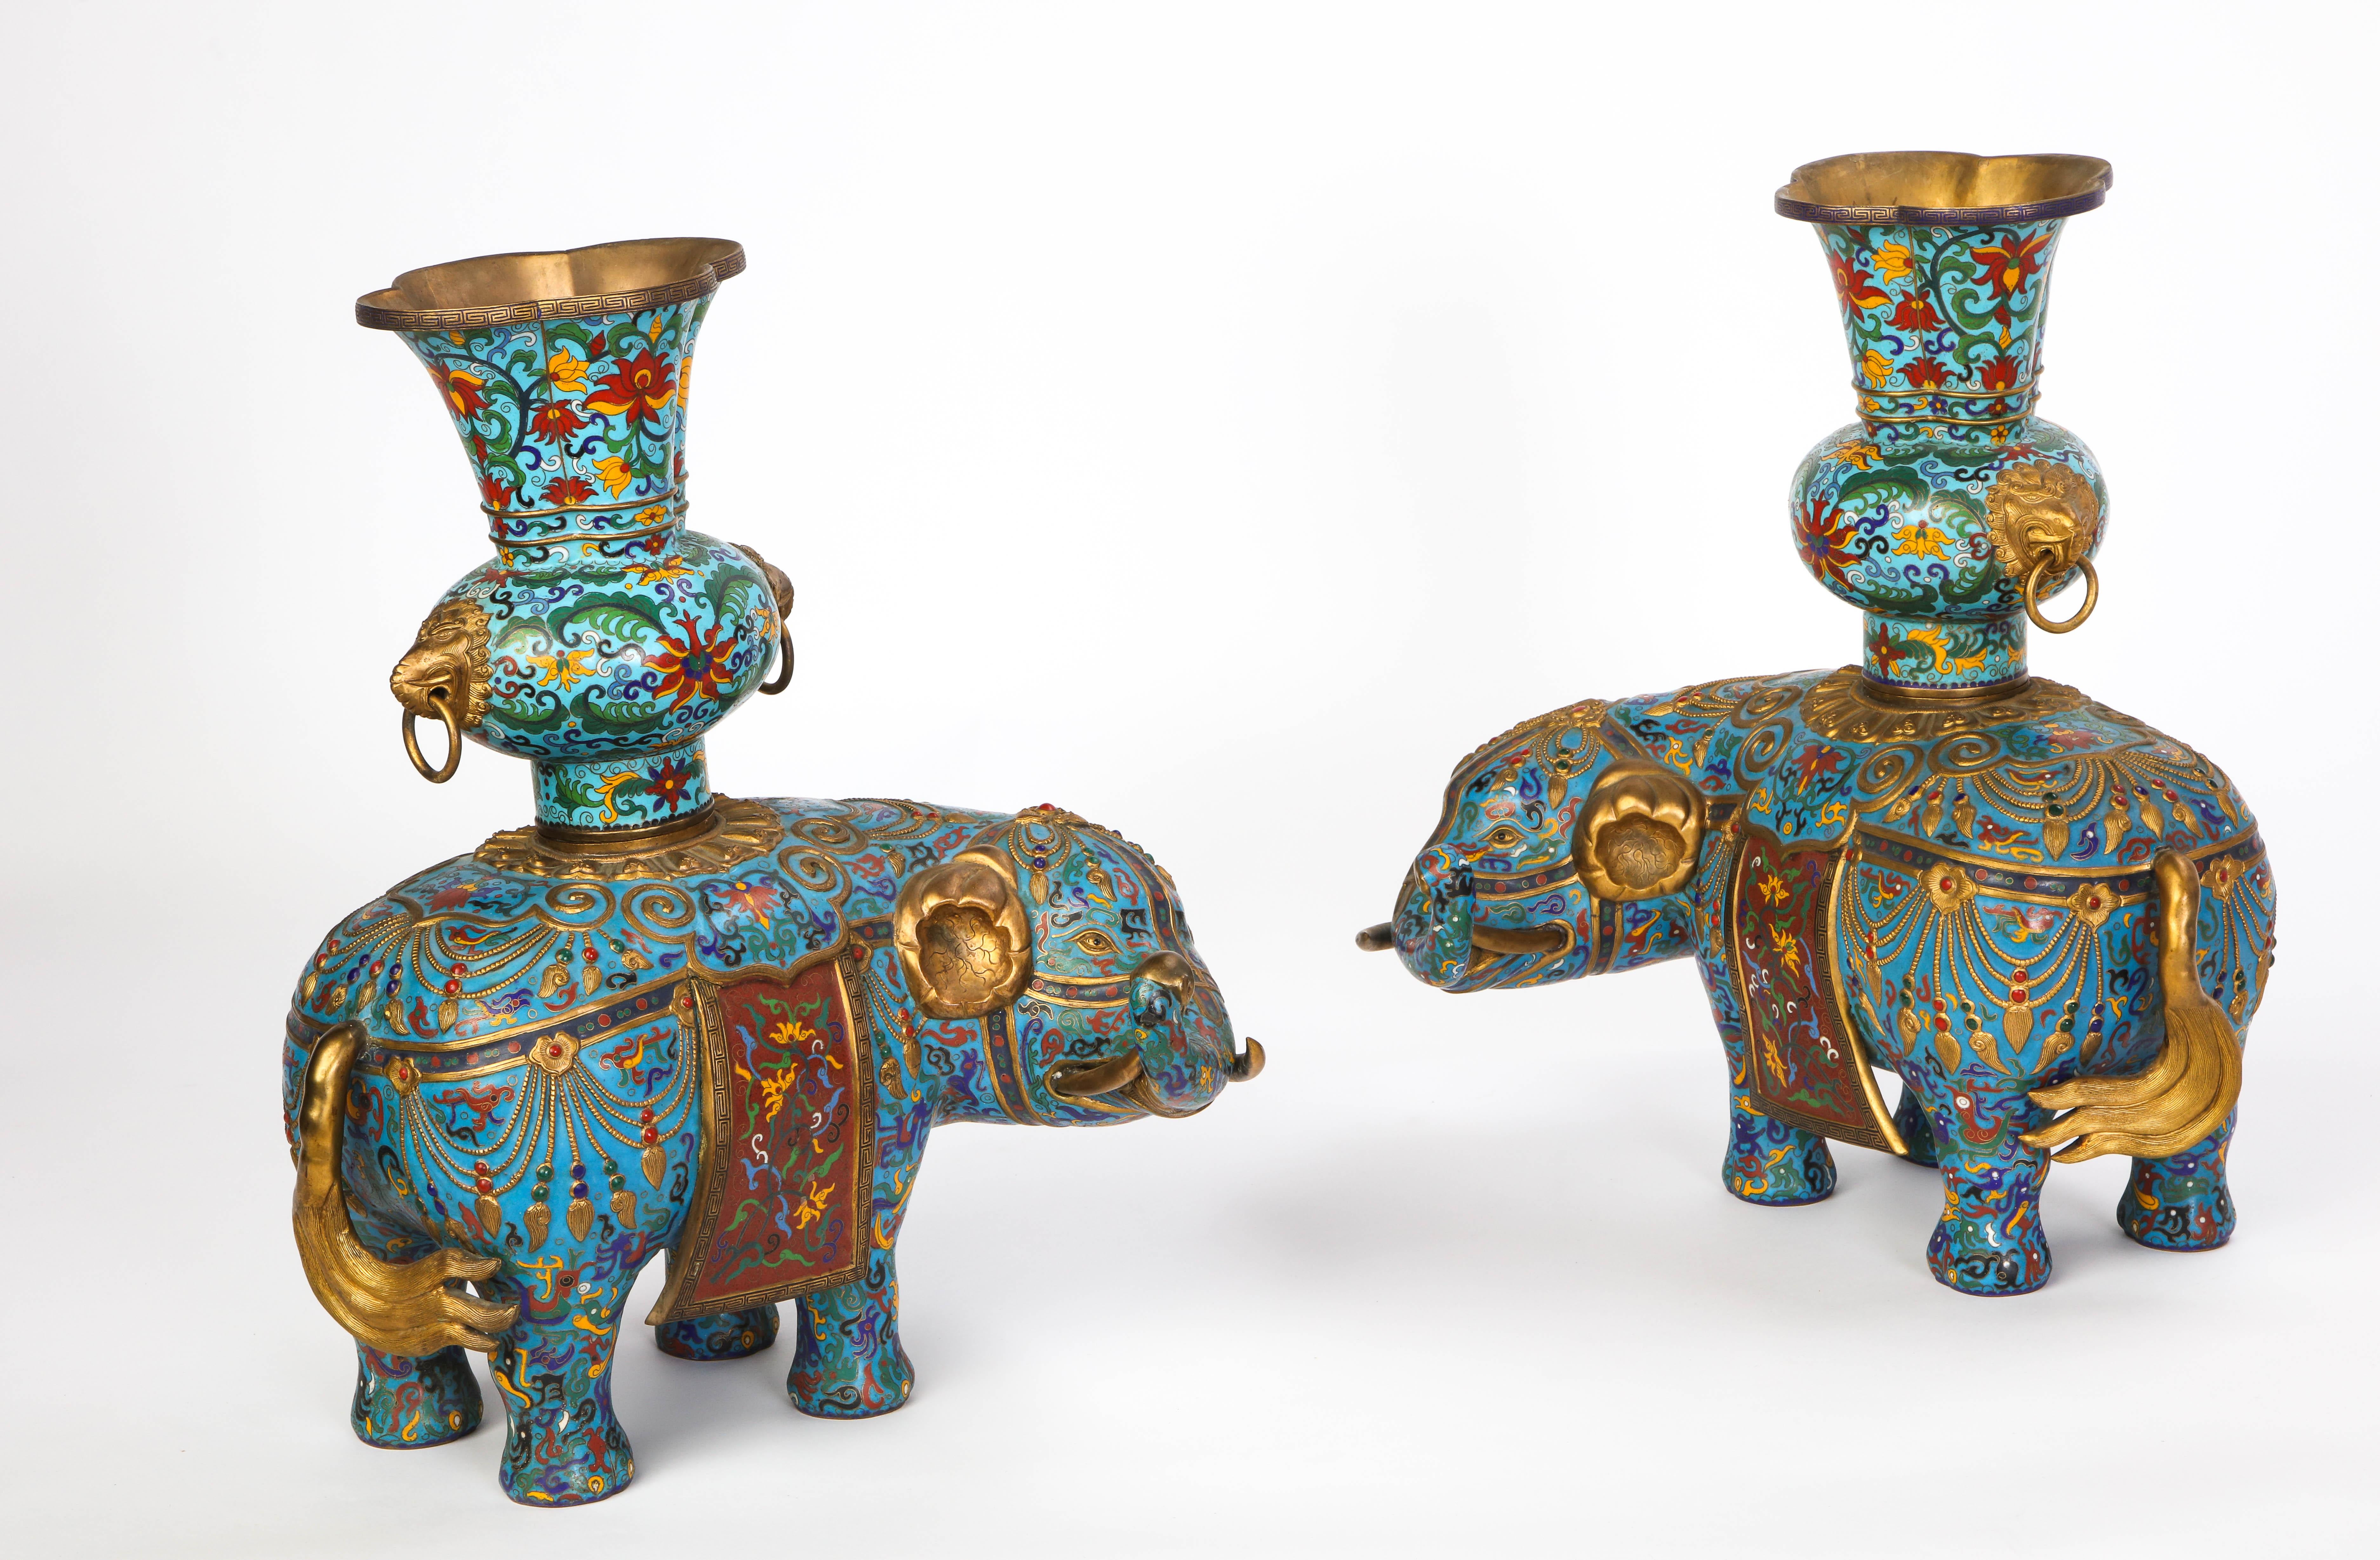 Pair of Chinese Cloisonne Enamel Elephant-Form Pricket Sticks, 20th Century For Sale 4